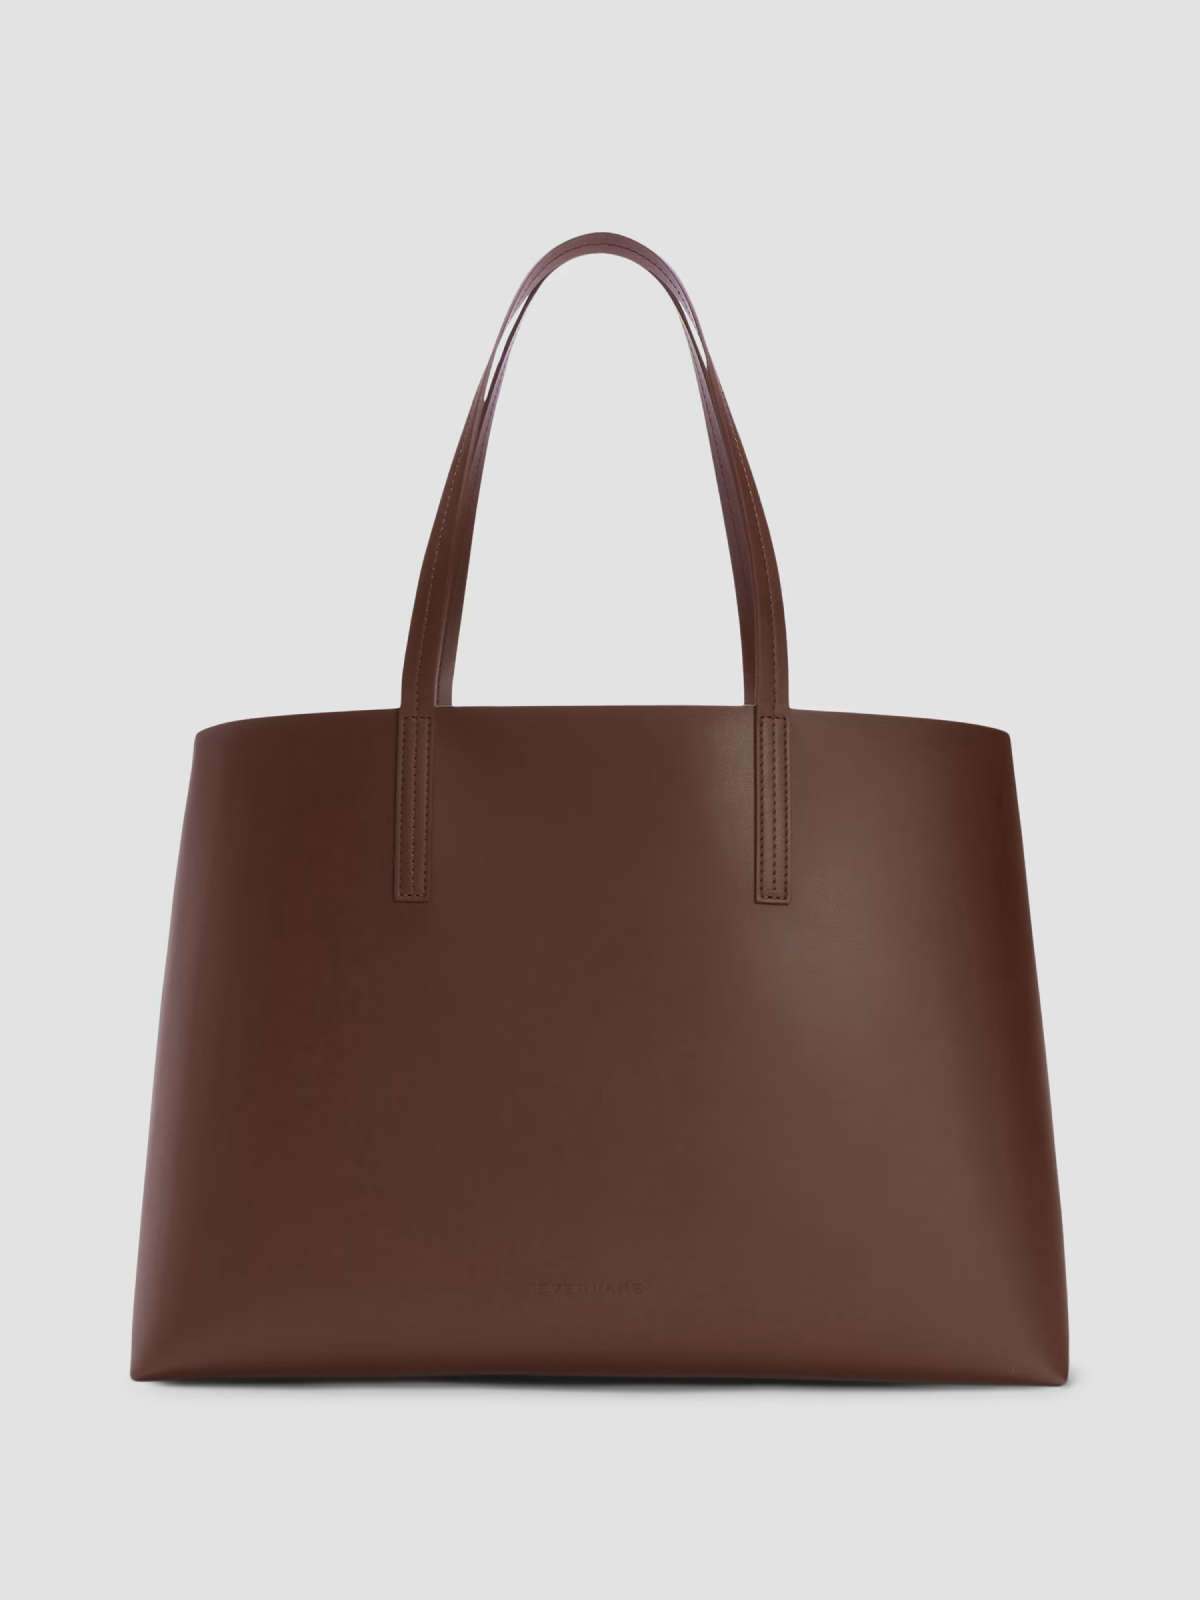 The New Day Market Tote